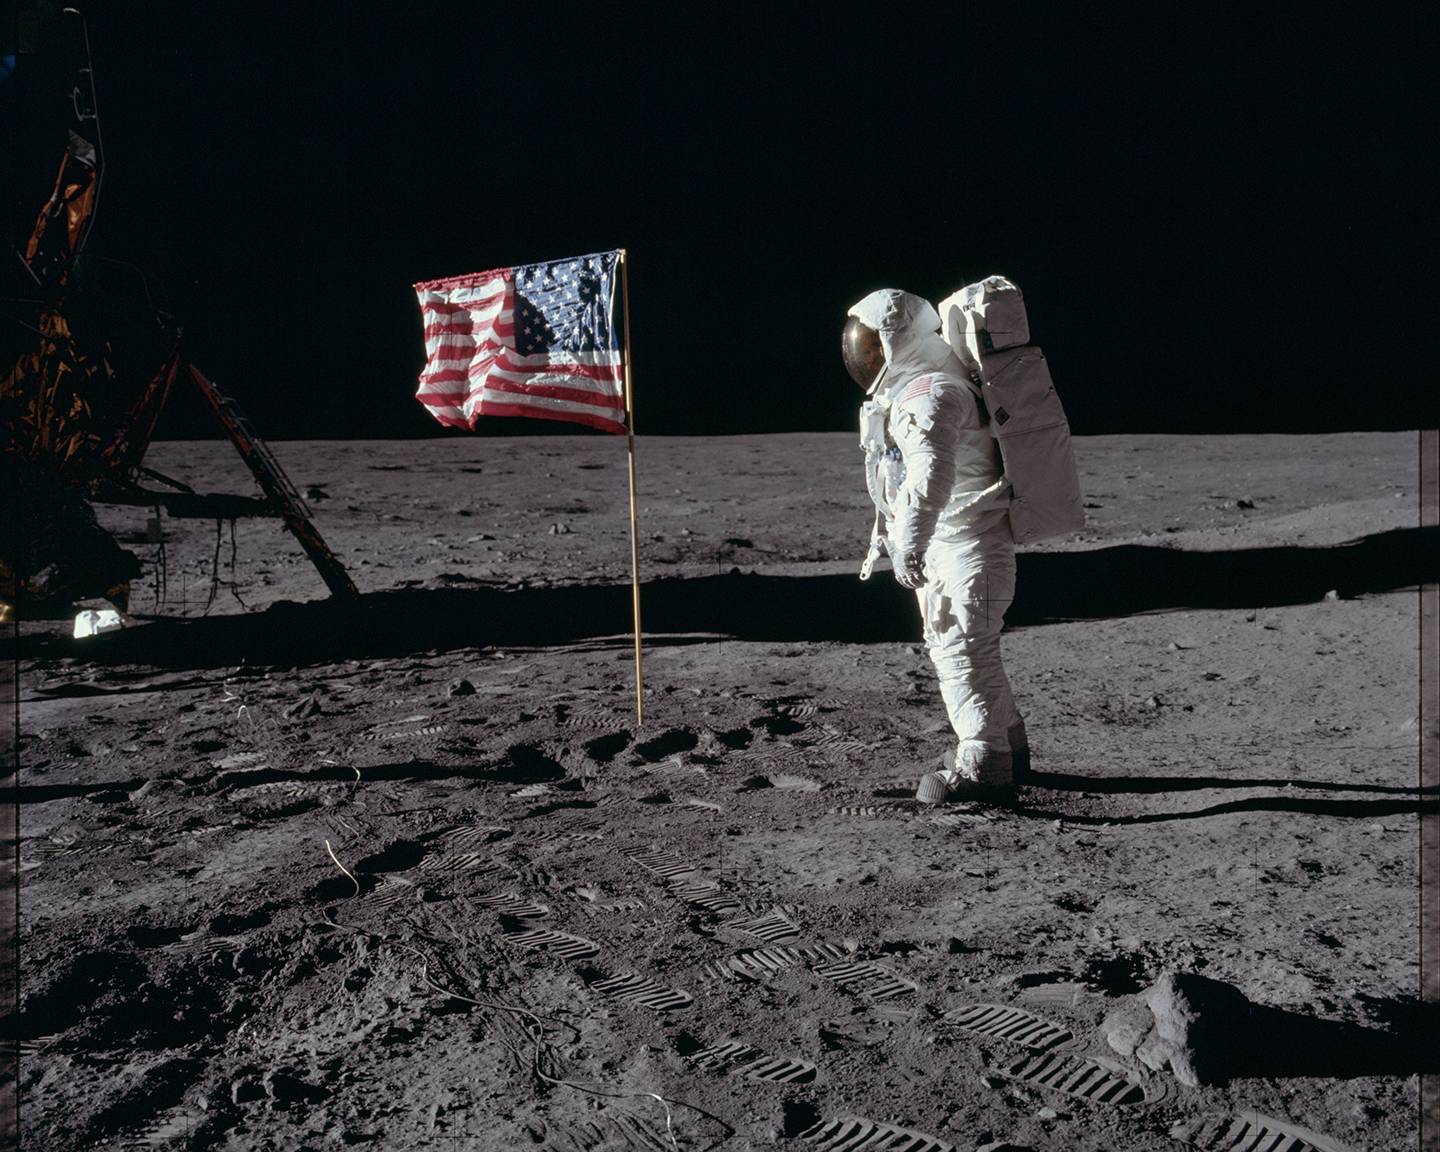 Buzz Aldrin salutes the American flag on the moon